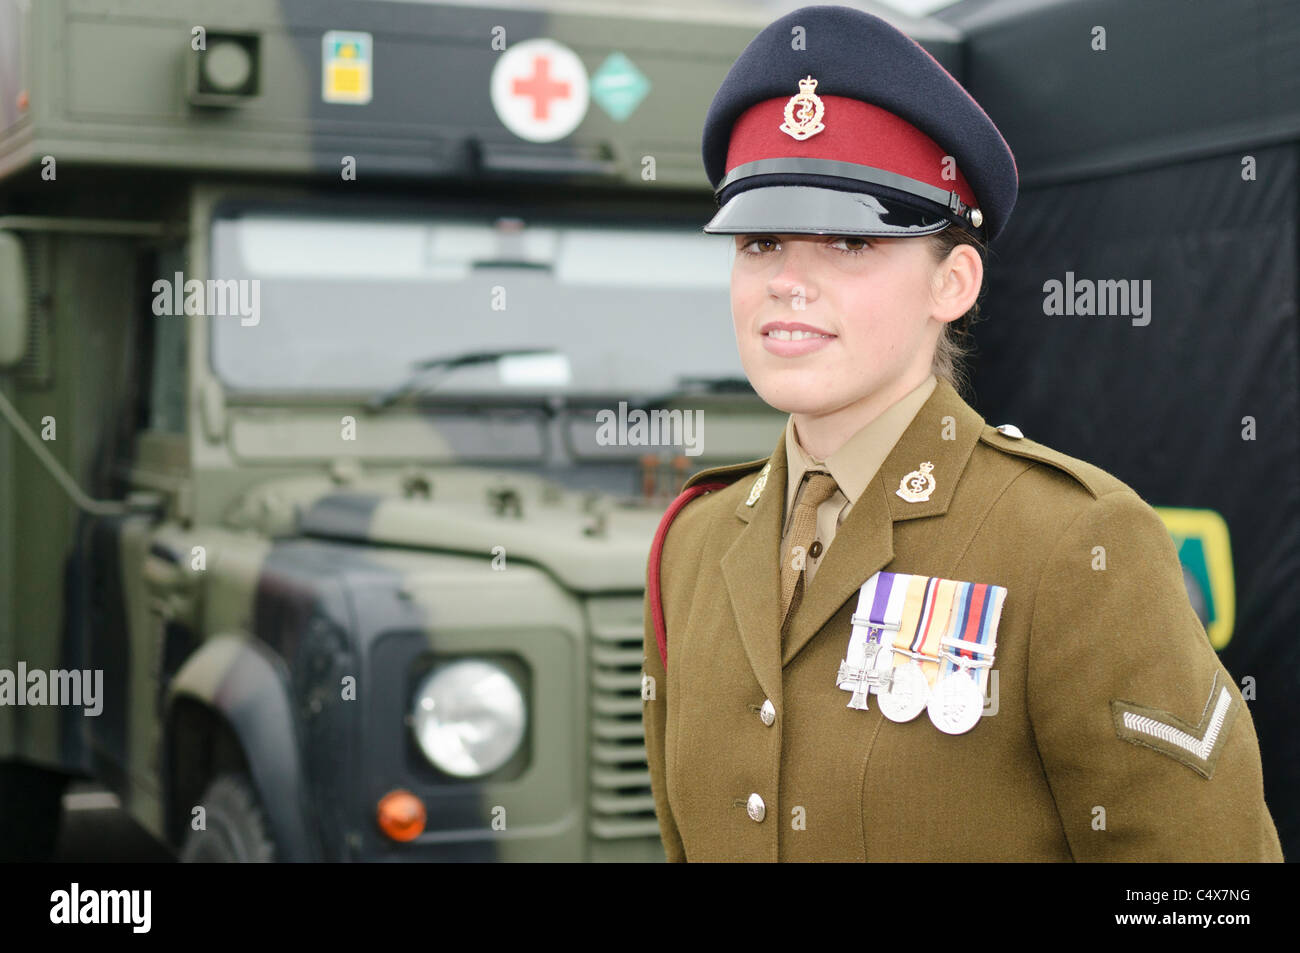 Carrickfergus, Northern Ireland. 26 June 2011 - Lance Corporal Kylie Watson (24), from Ballymena, who was awarded the Military Cross after she put herself in “mortal danger” to treat a wounded Afghan soldier while serving with the Royal Medical Corp Stock Photo